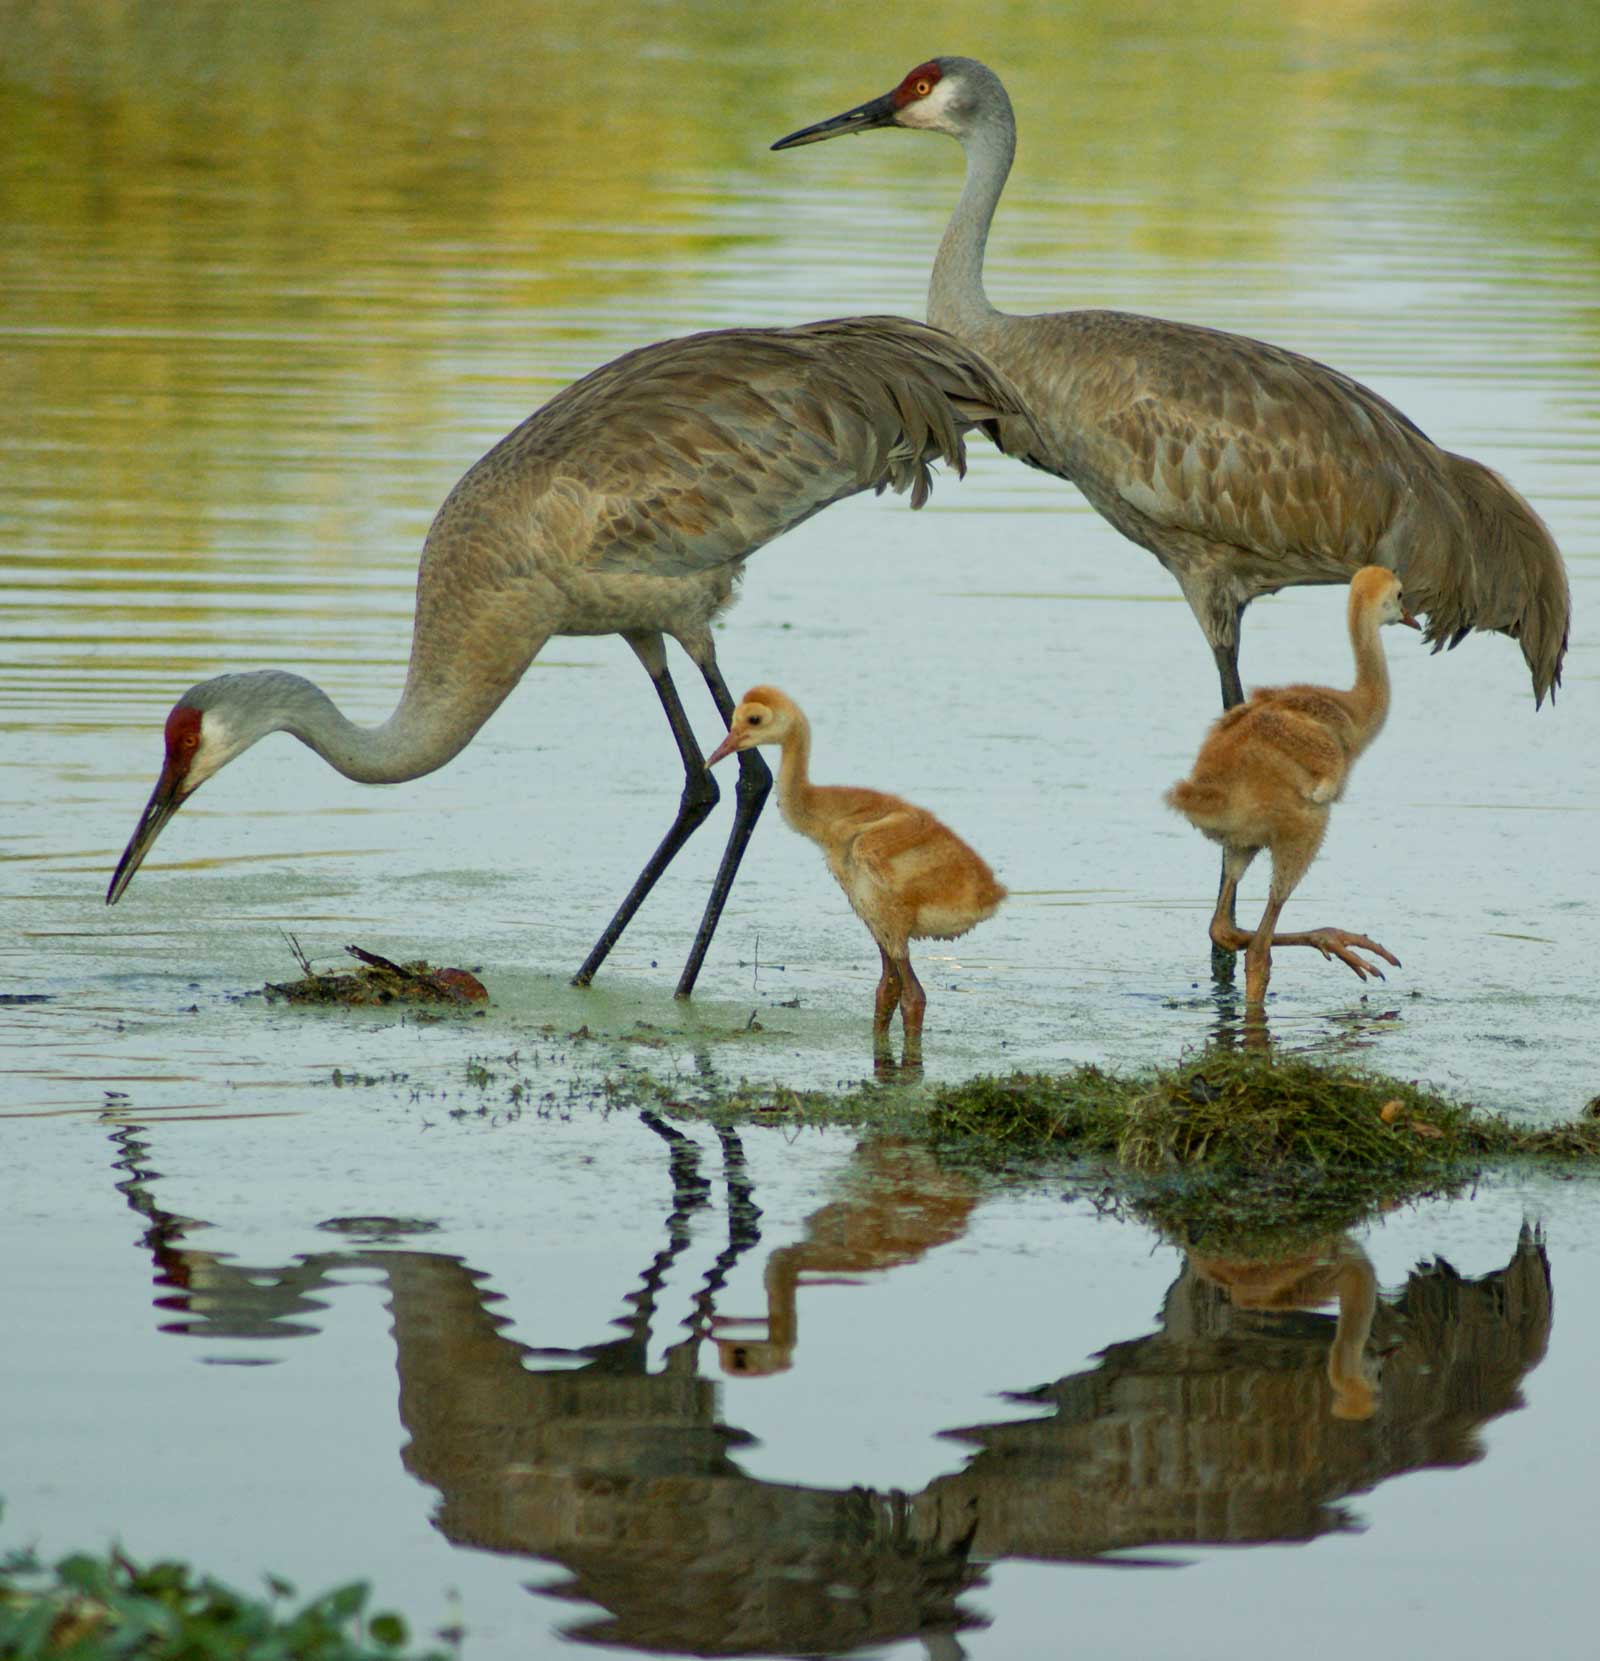 A family of Sandhill Cranes in shallow water